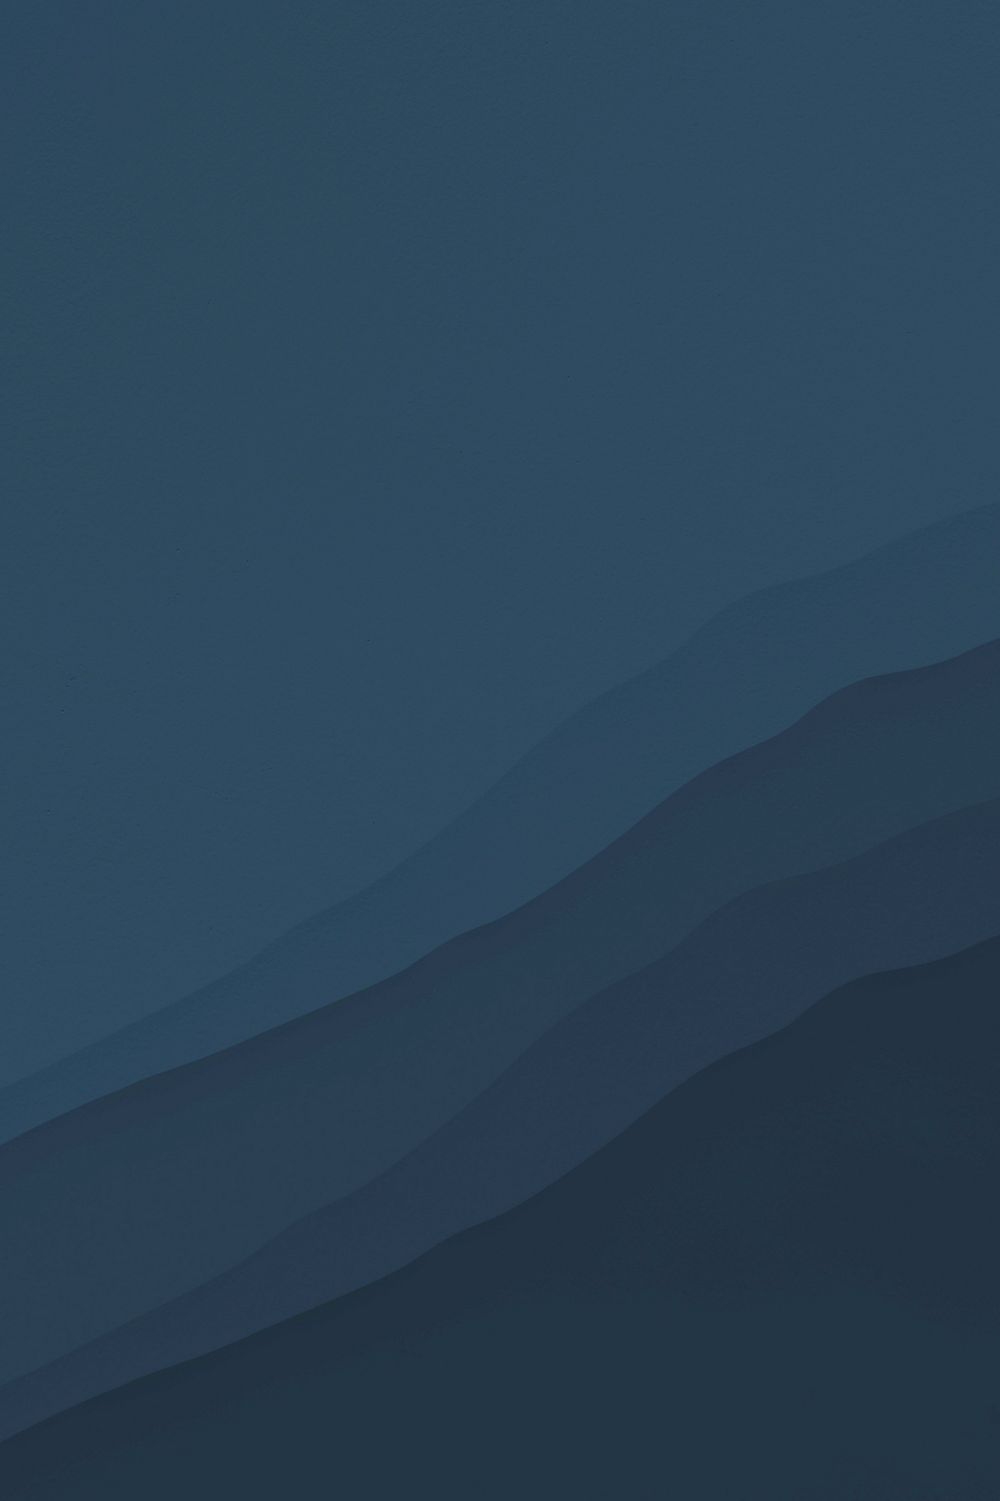 Navy blue abstract background wallpaper | Free Photo - rawpixel